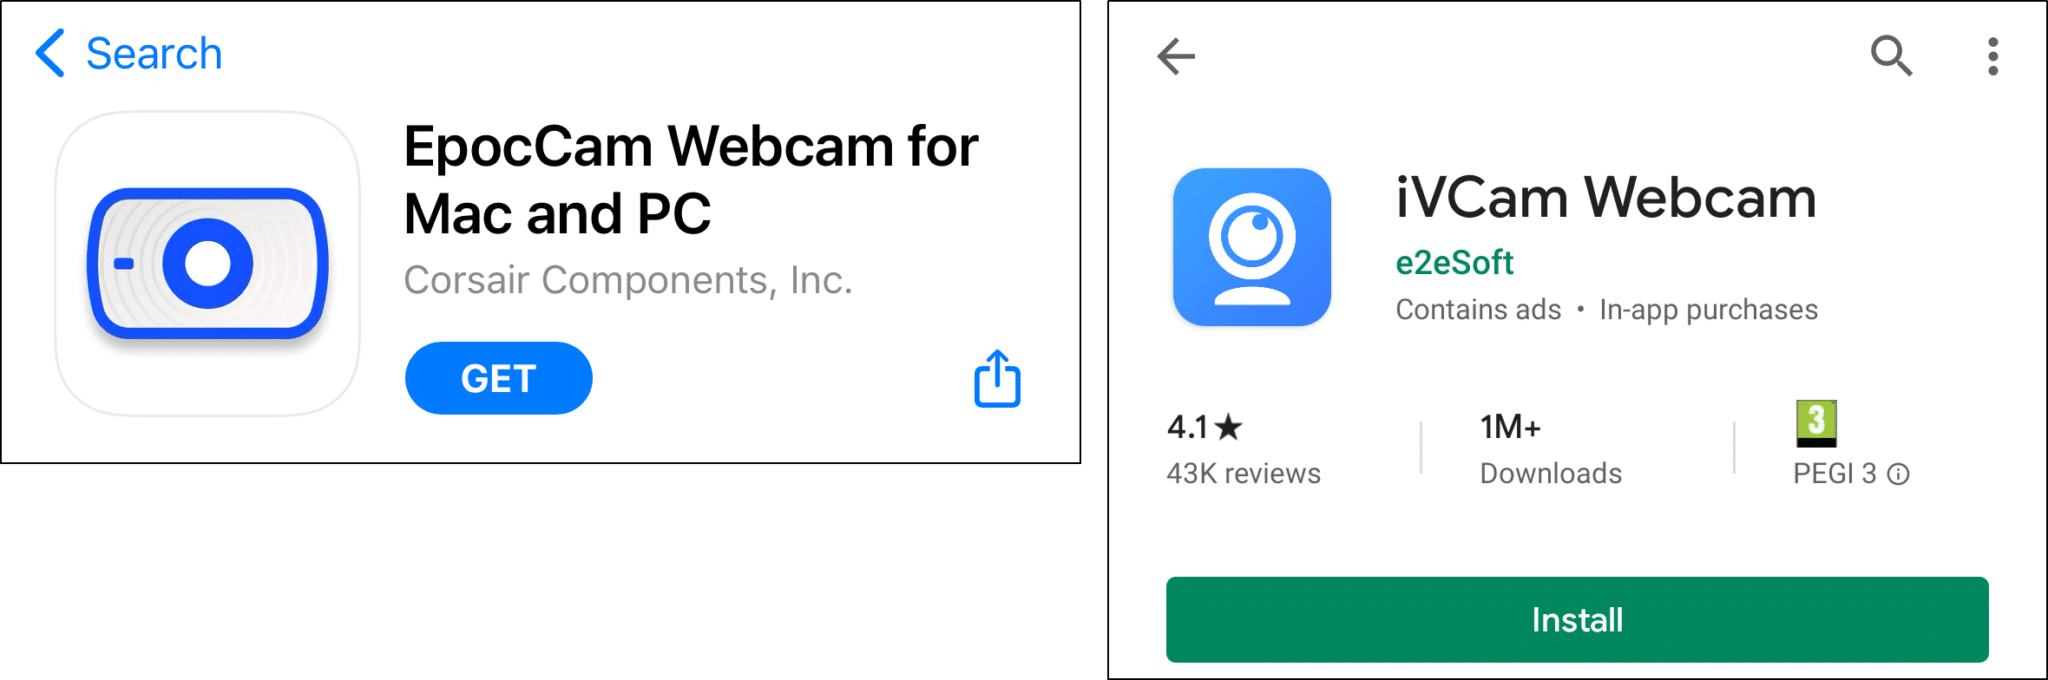 install webcam app on iPhone, iPad and android to use phone as webcam to fix Microsoft Teams custom virtual background or effects not working, showing or loading